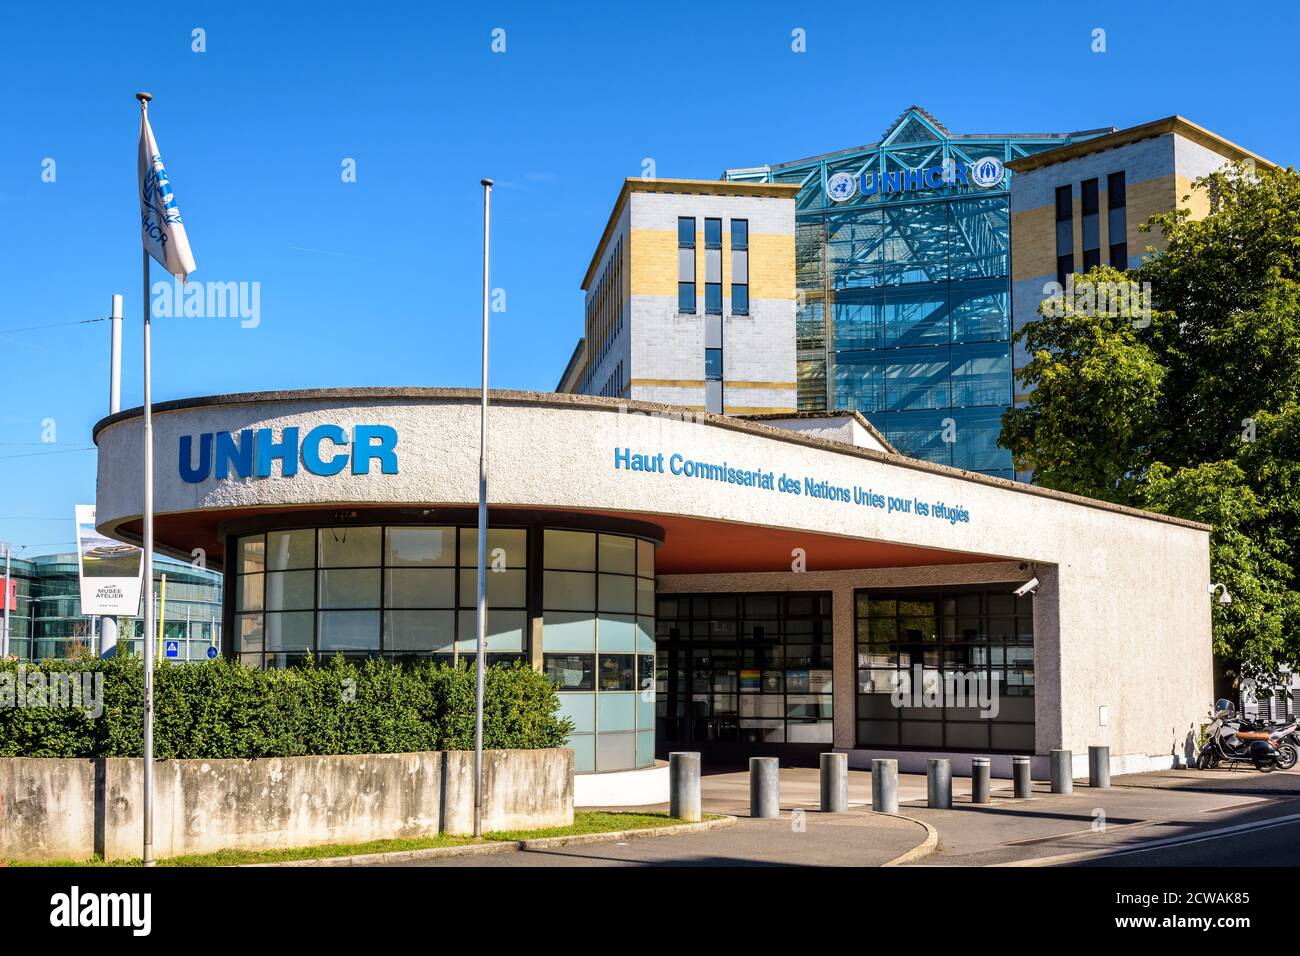 Headquarters of the United Nations High Commissioner for Refugees (UNHCR) in Geneva, Switzerland, a UN specialized agency helping refugees worldwide. Stock Photo